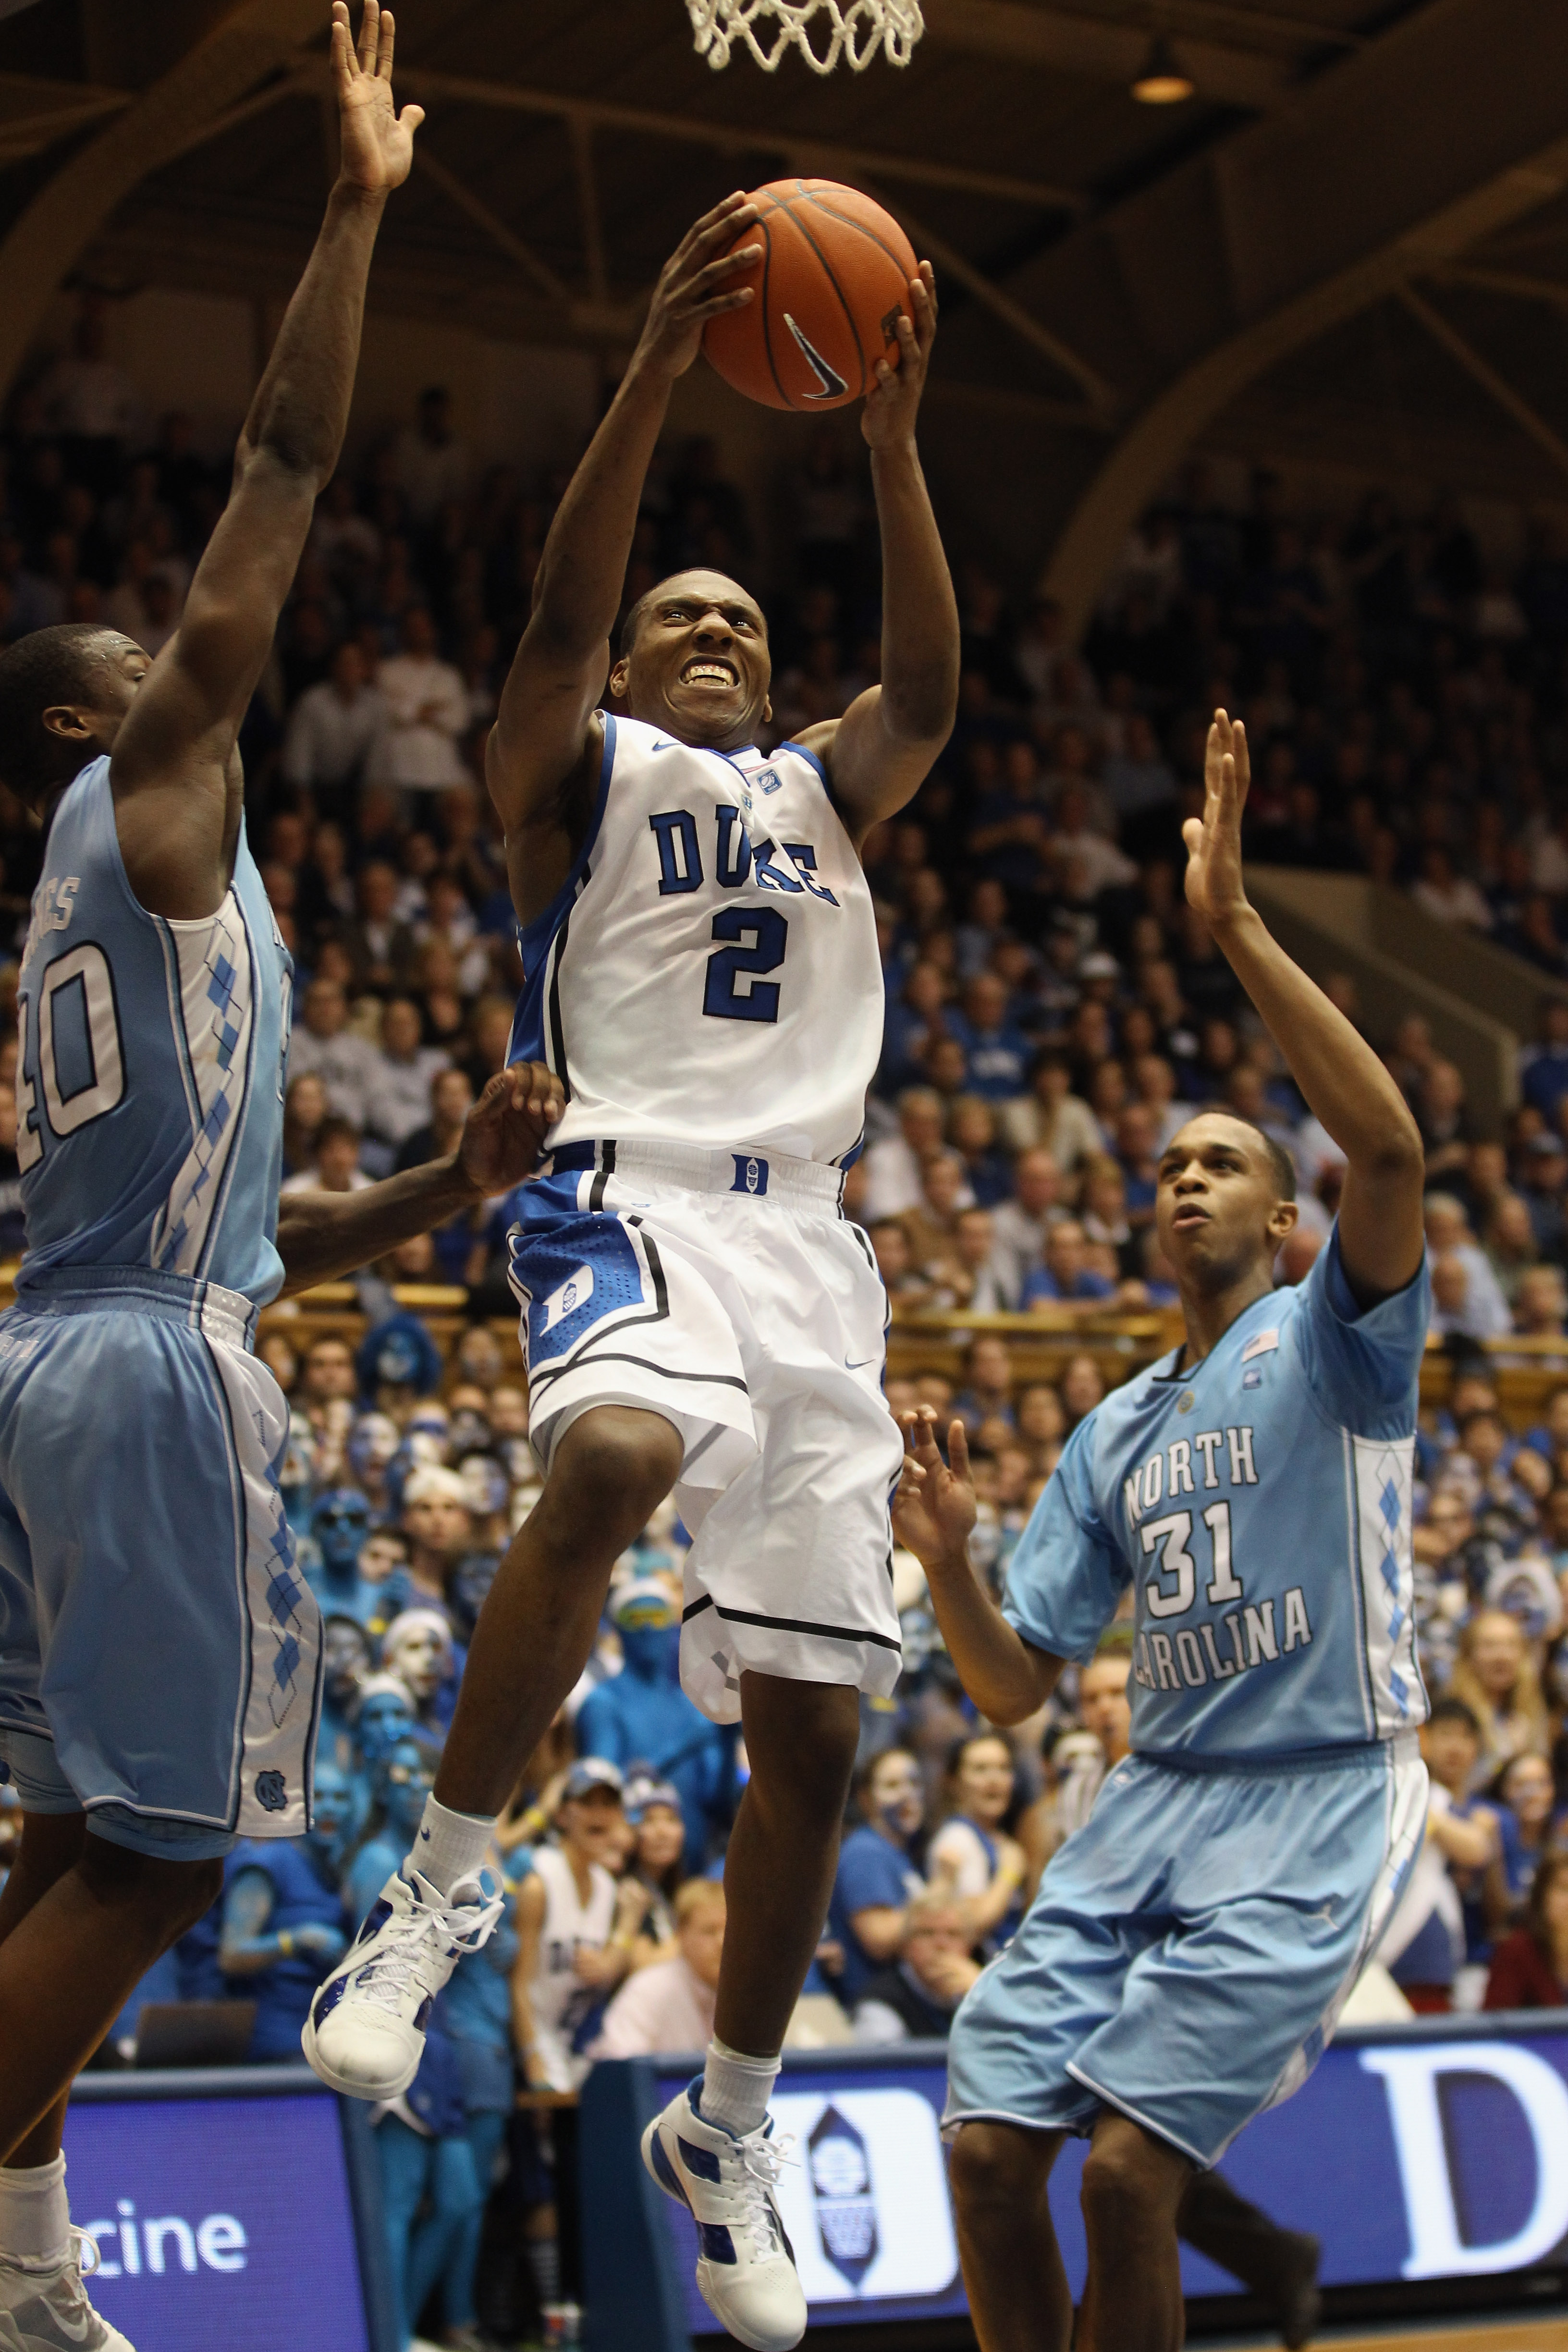 DURHAM, NC - FEBRUARY 09:  Nolan Smith #2 of the Duke Blue Devils against the North Carolina Tar Heels during their game at Cameron Indoor Stadium on February 9, 2011 in Durham, North Carolina.  (Photo by Streeter Lecka/Getty Images)